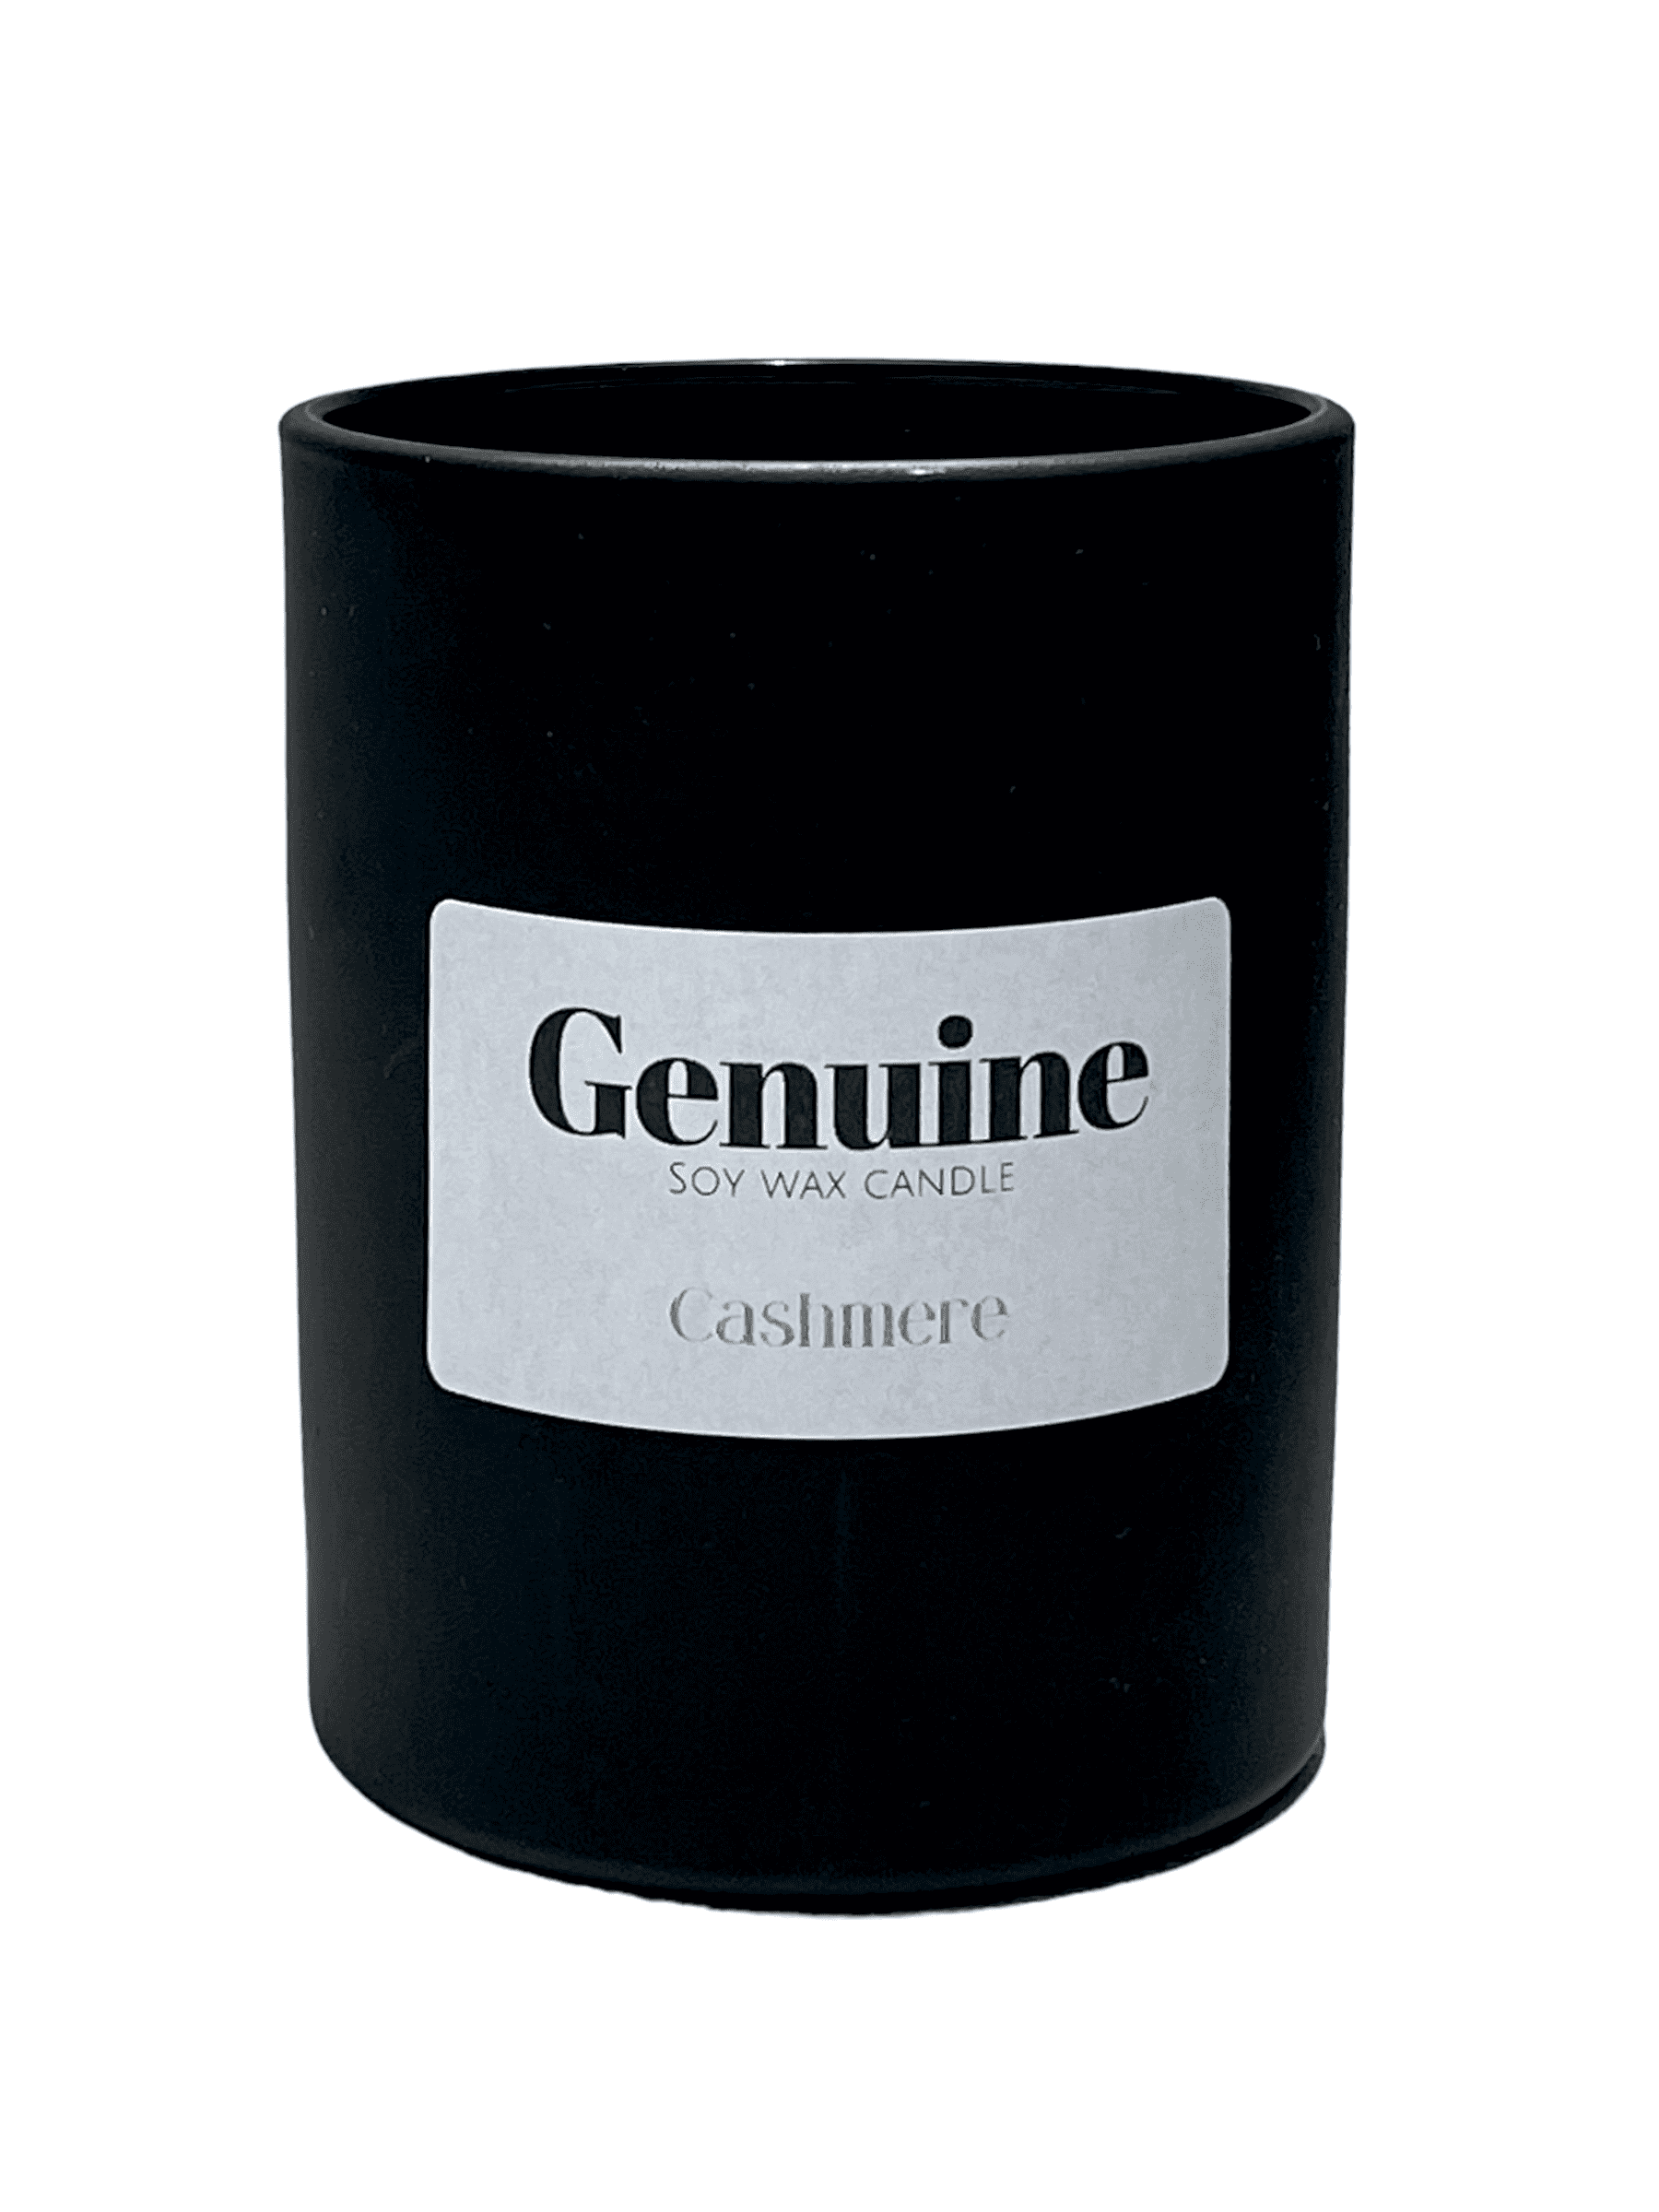 Genuine Design Soy Wax Candle - Cashmere - Hand Poured in Calgary, Alberta, Canada. Genuine Design Luxury Consignment.